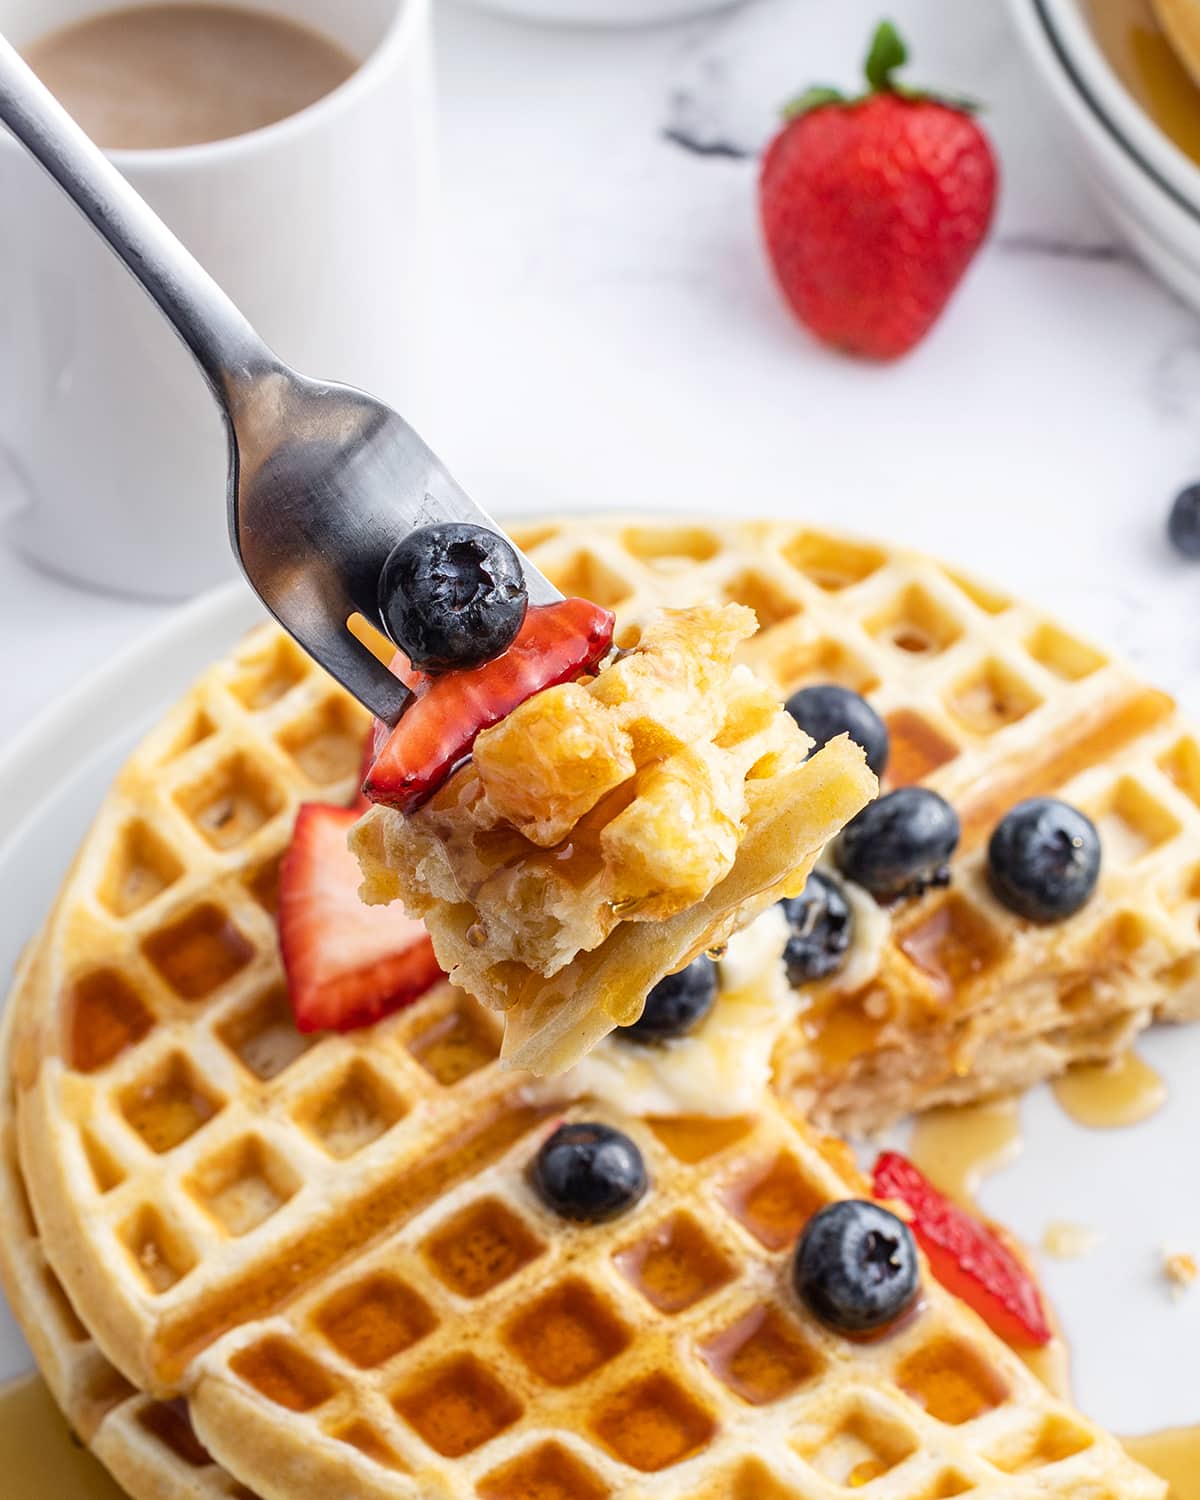 A bite of waffle pieces and fresh berries on a fork above a plate of waffles.